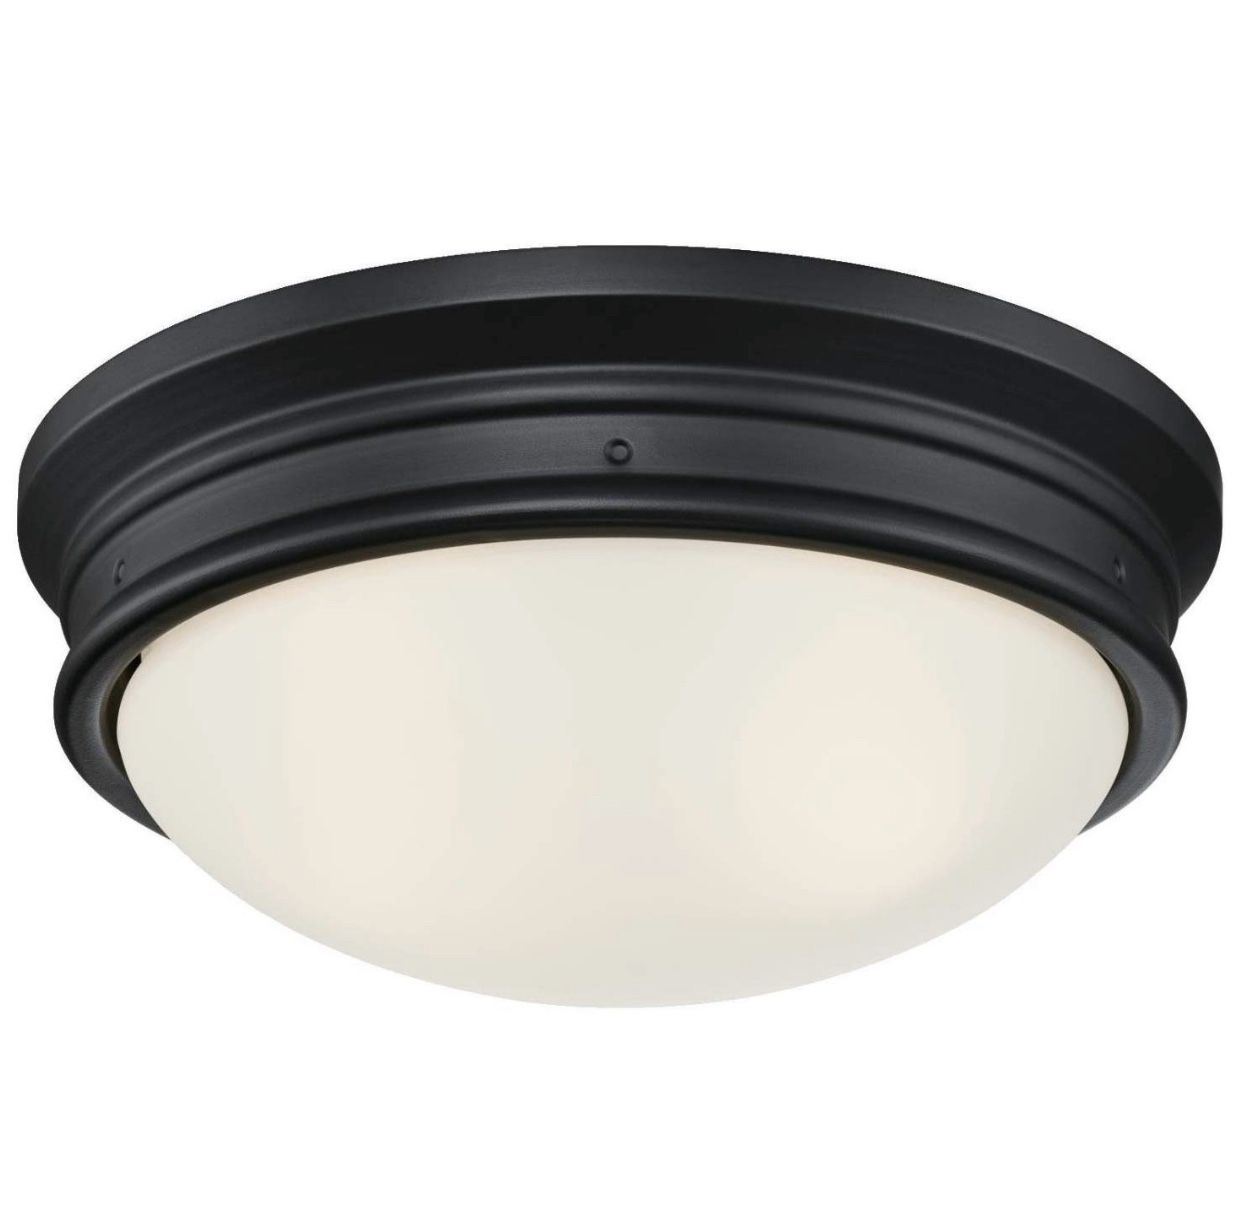 Westinghouse Lighting 6324100 Meadowbrook Two-Light Indoor Flush-Mount Ceiling Fixture, Matte Black Finish with Frosted